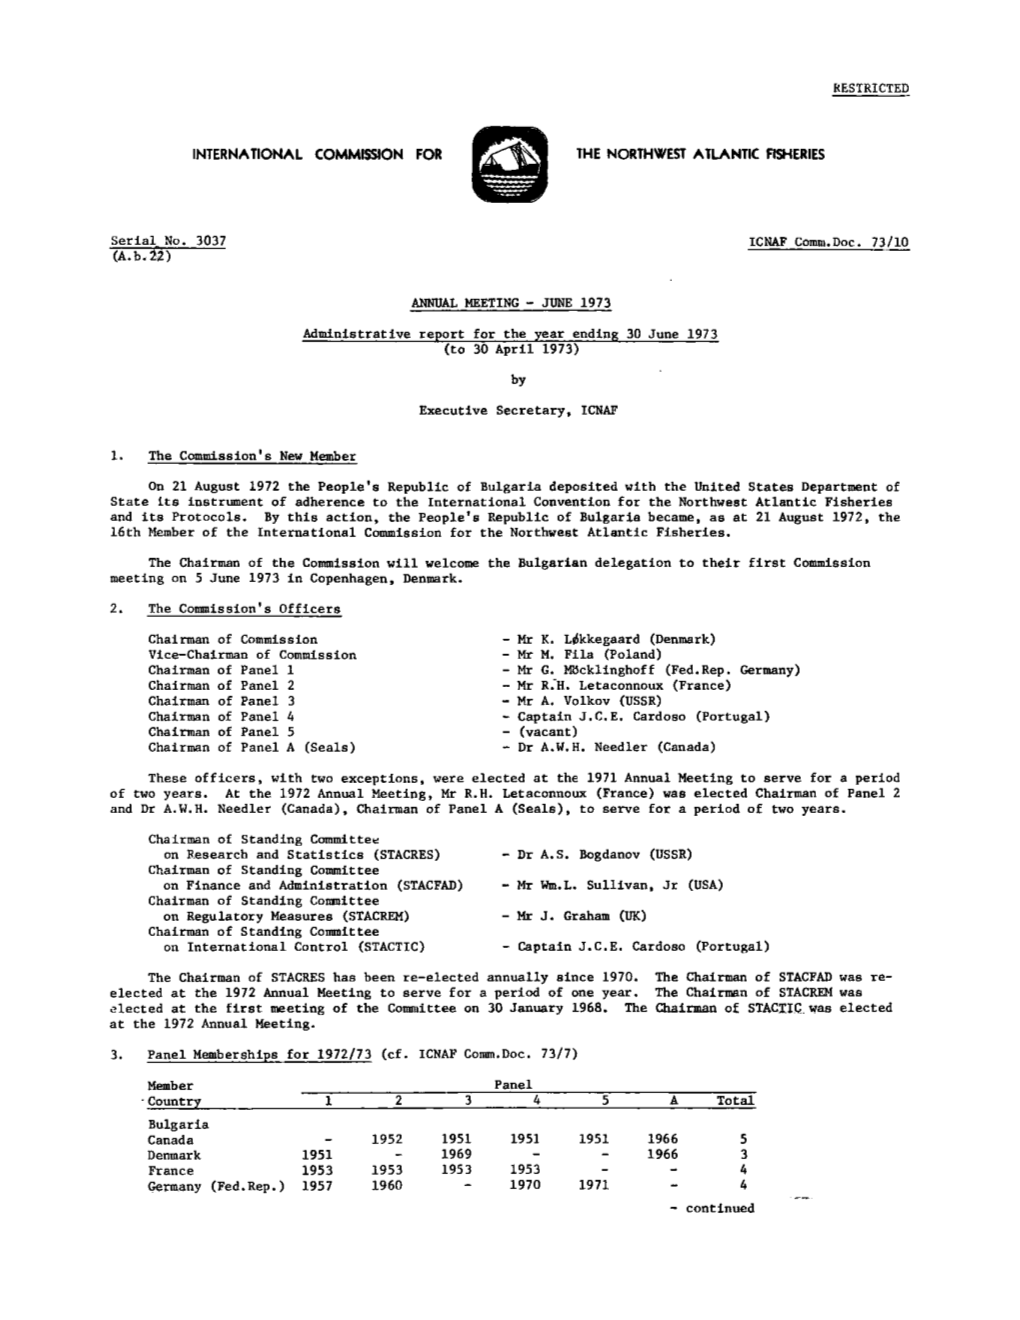 Administrative Report for the Year Ending 30 June 1973 (To 30 April 1973)